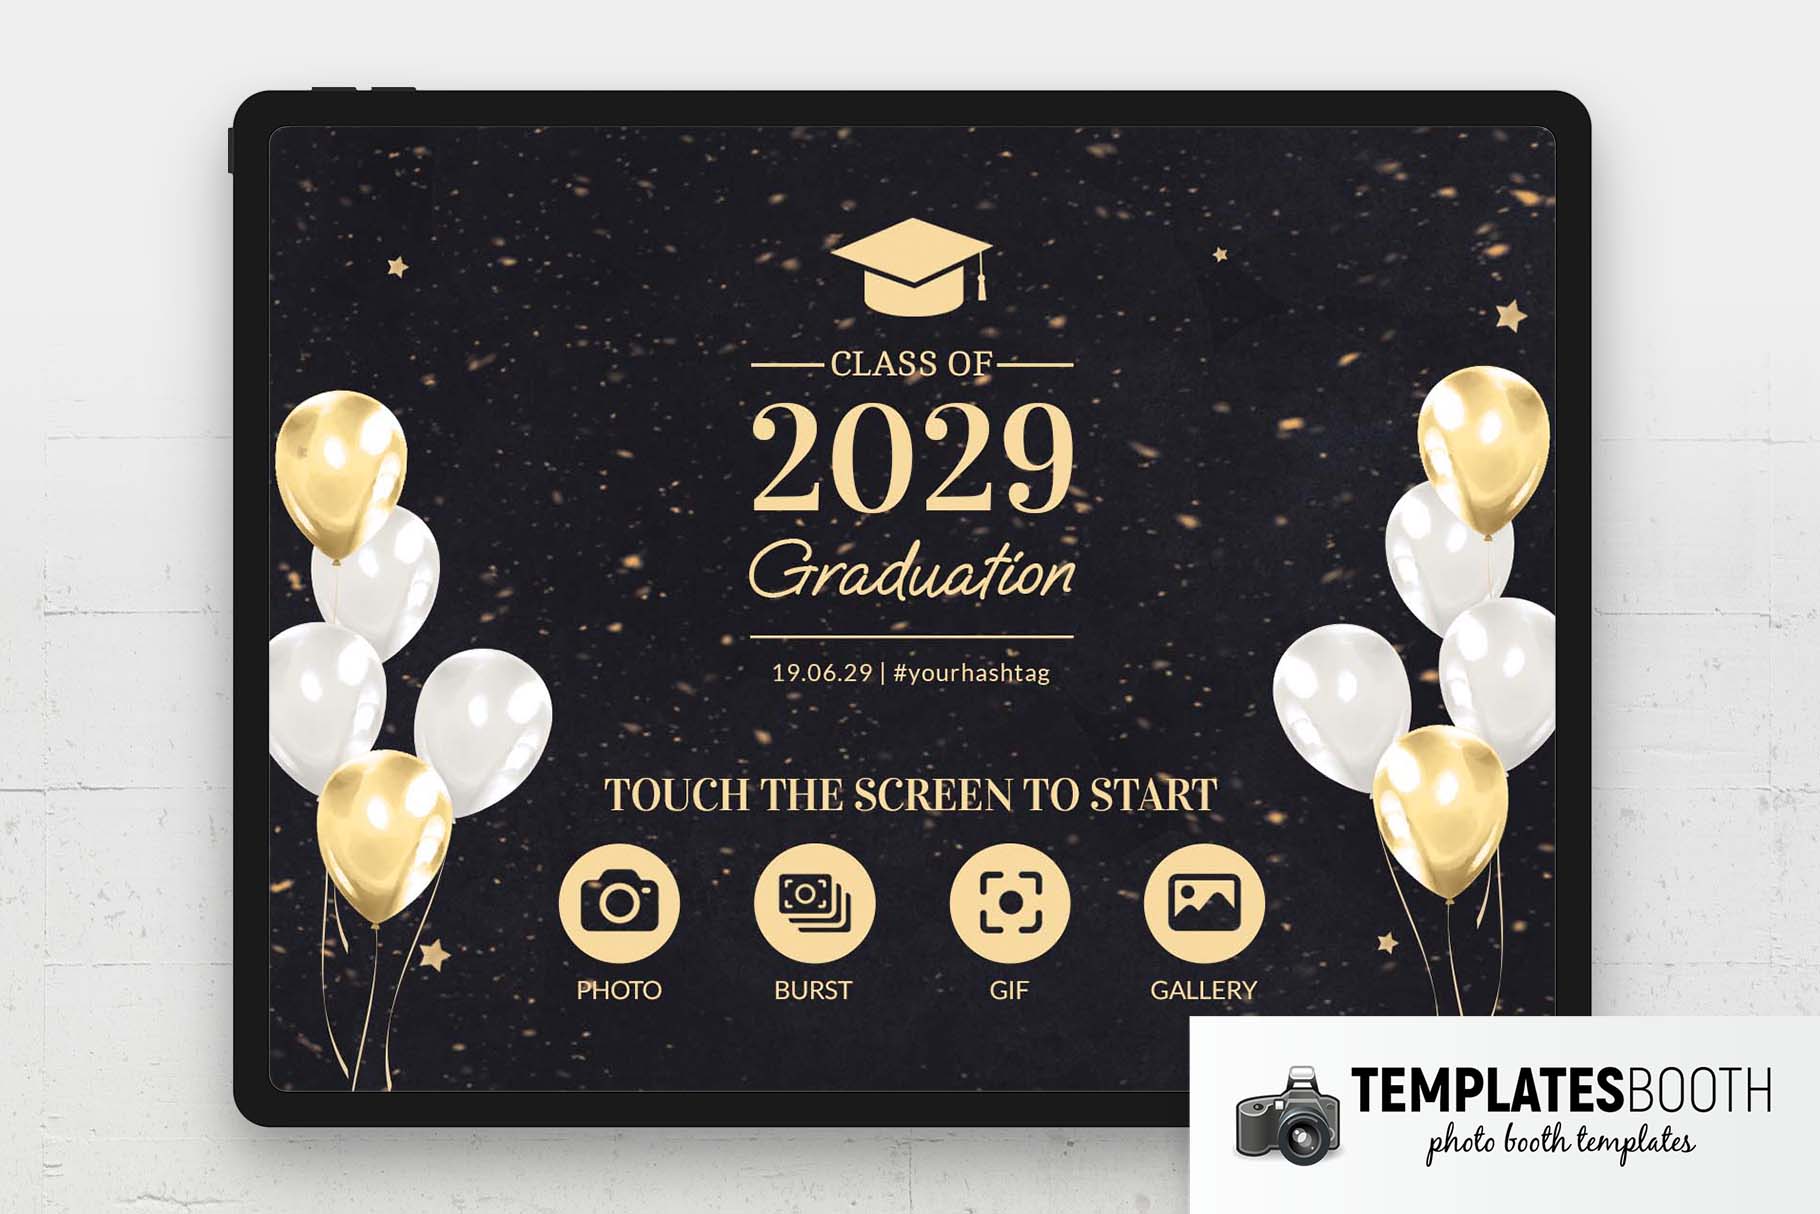 Graduation Party Photo Booth Welcome Screen